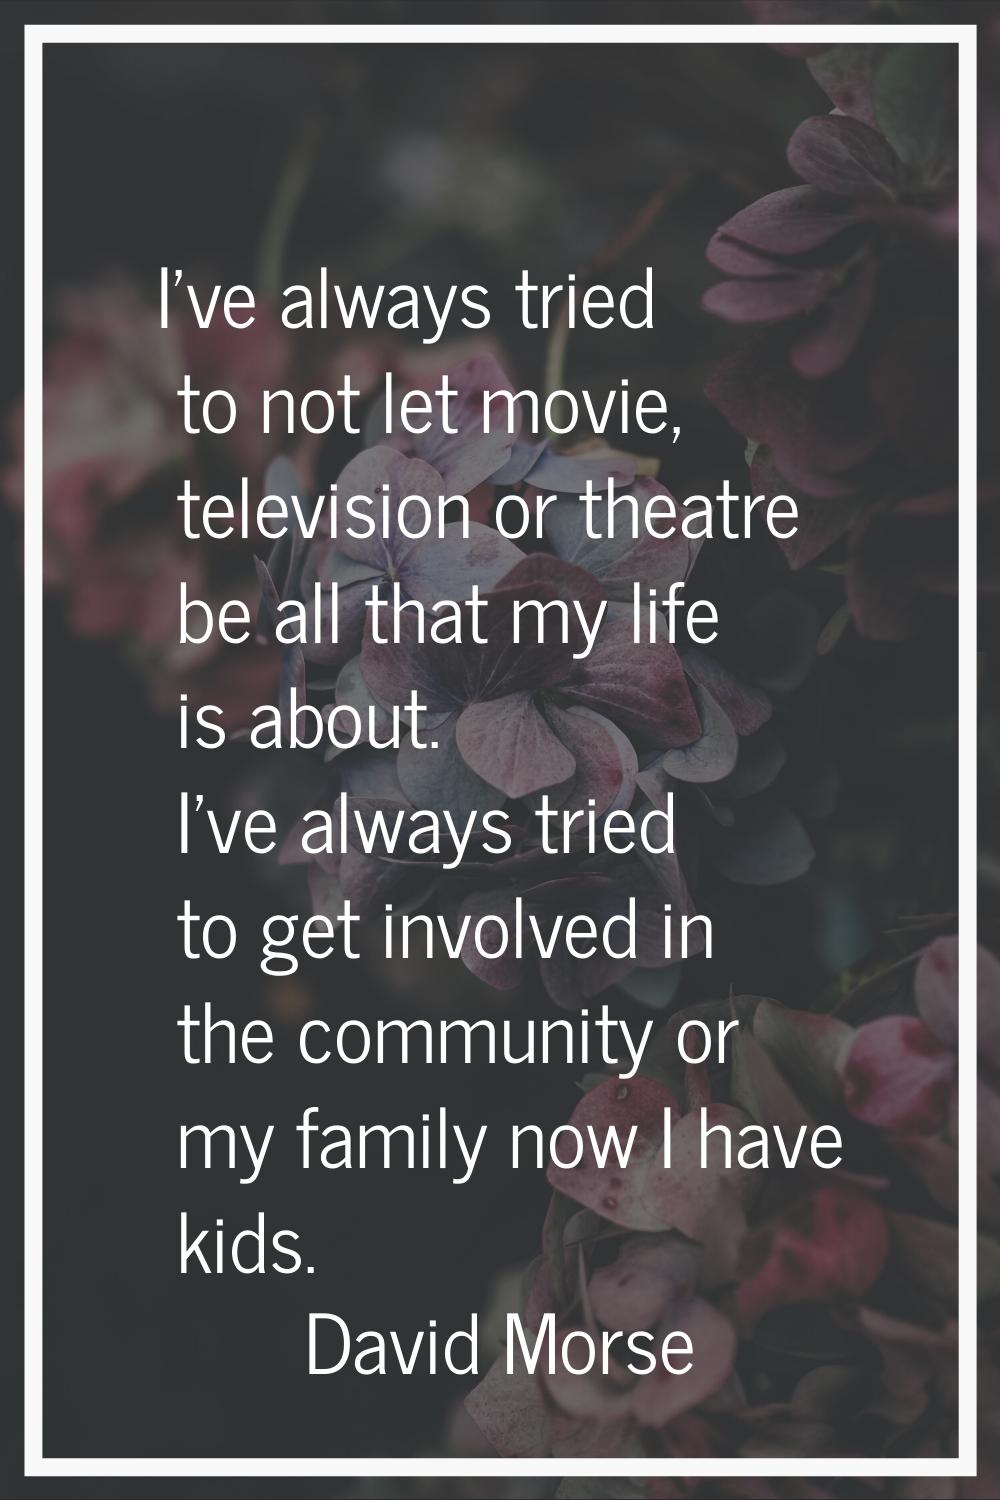 I've always tried to not let movie, television or theatre be all that my life is about. I've always